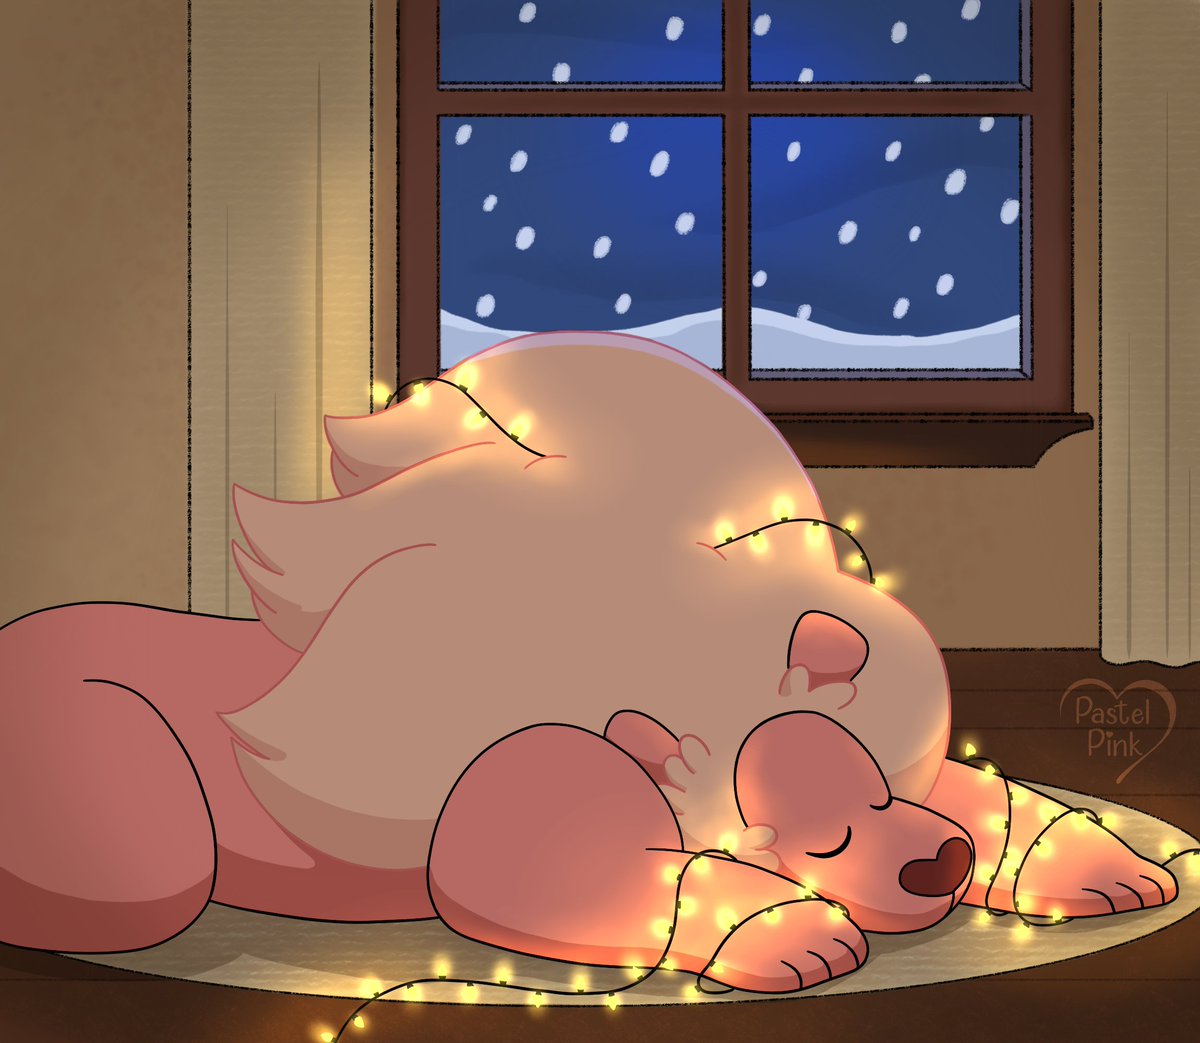 Twas the night before Christmas, and all through the house, not a creature was stirring, not even a... lion? (He's stolen the lights off the tree again) #Stevenuniverse #christmas #cozy #fanart